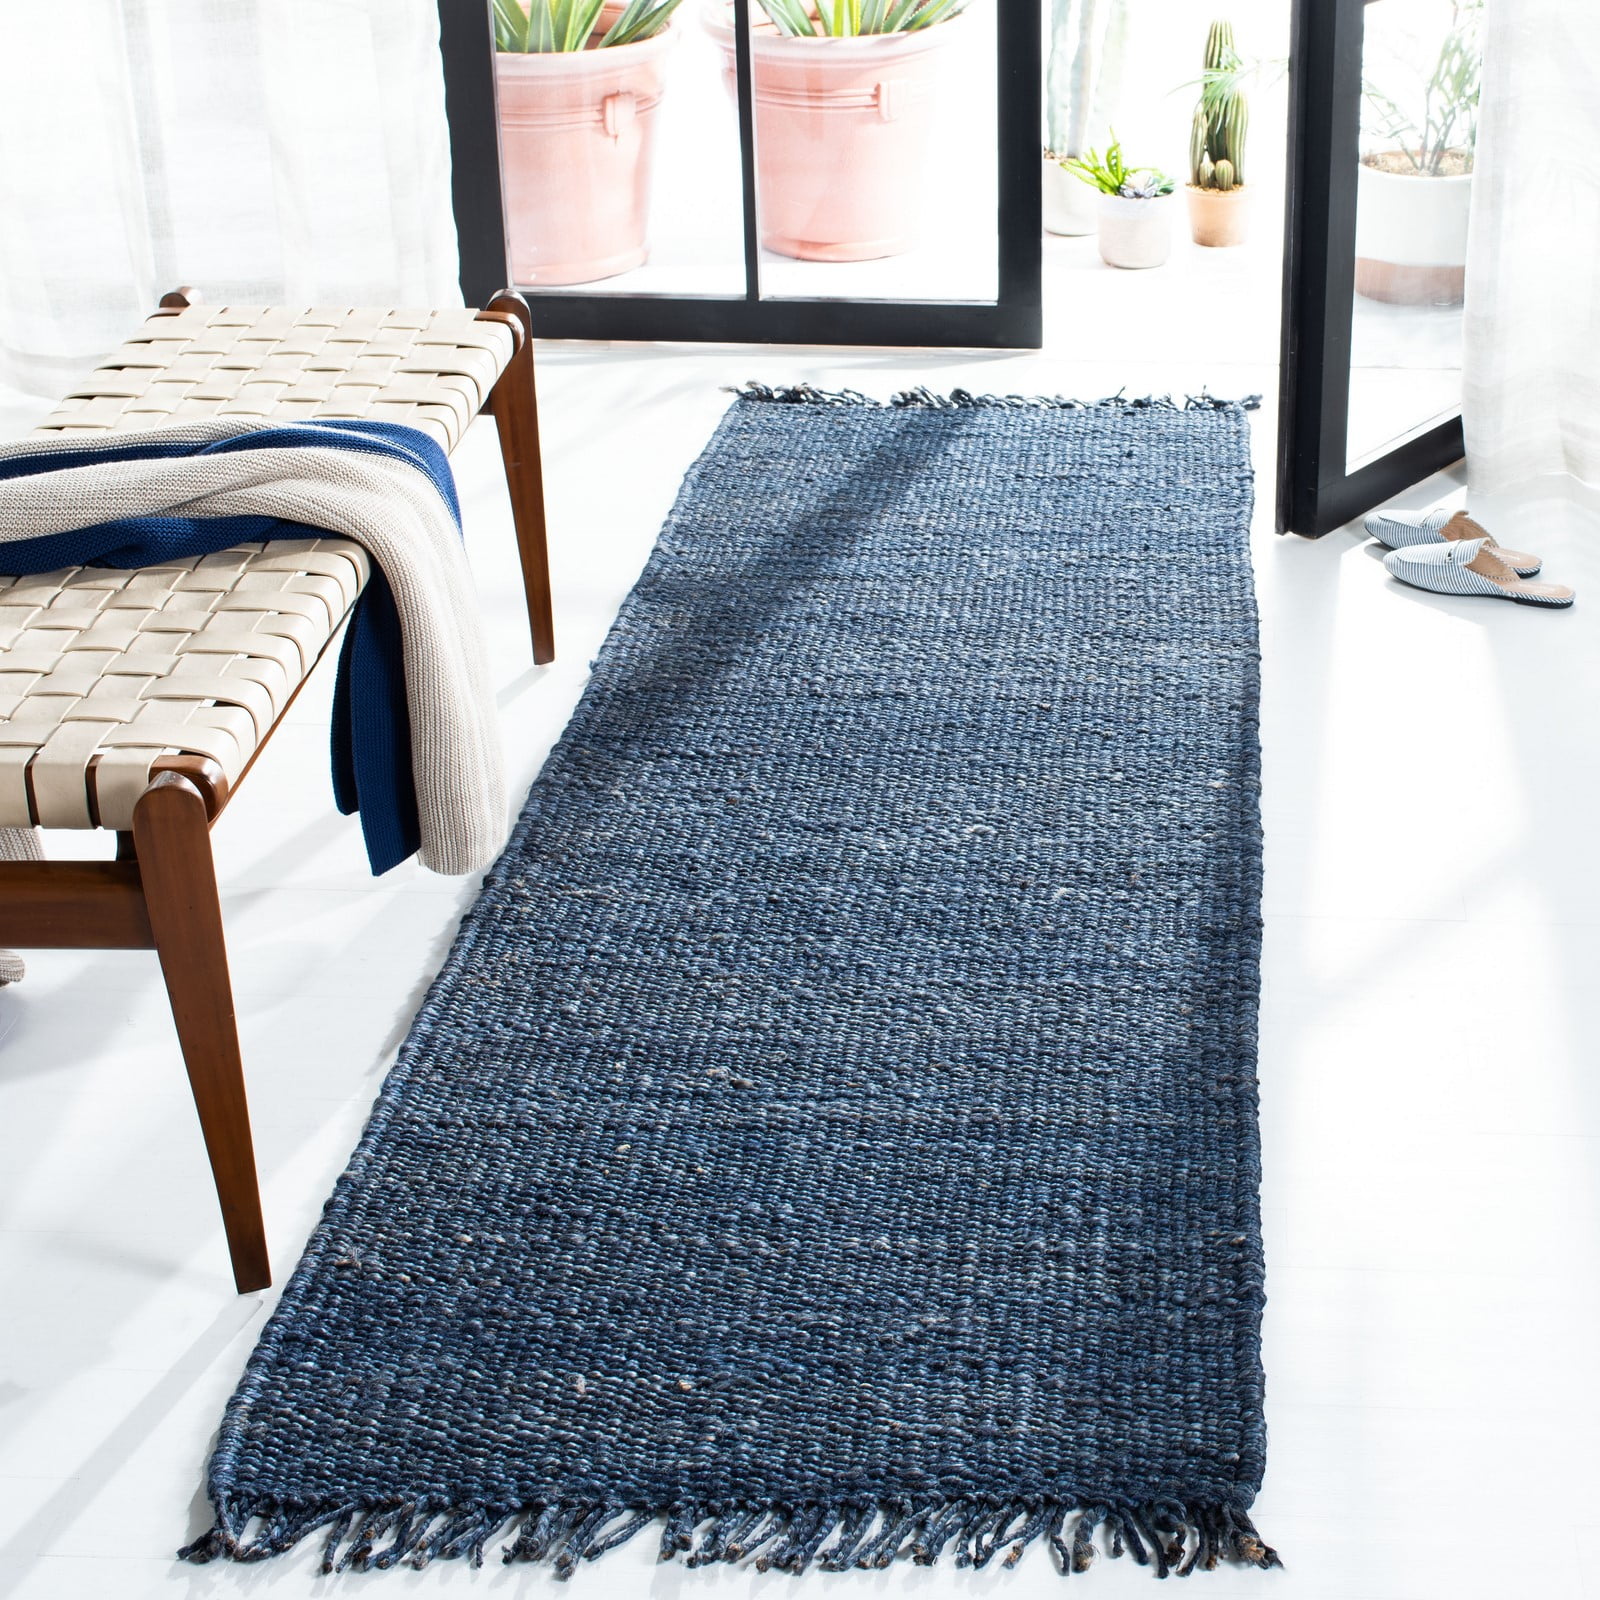 Handwoven Braided Navy Blue Jute with Natural Color Jute Boundary Area Rug Home Decor Jute Runner Carpet in Square Size 4 Feet X 4 Feet